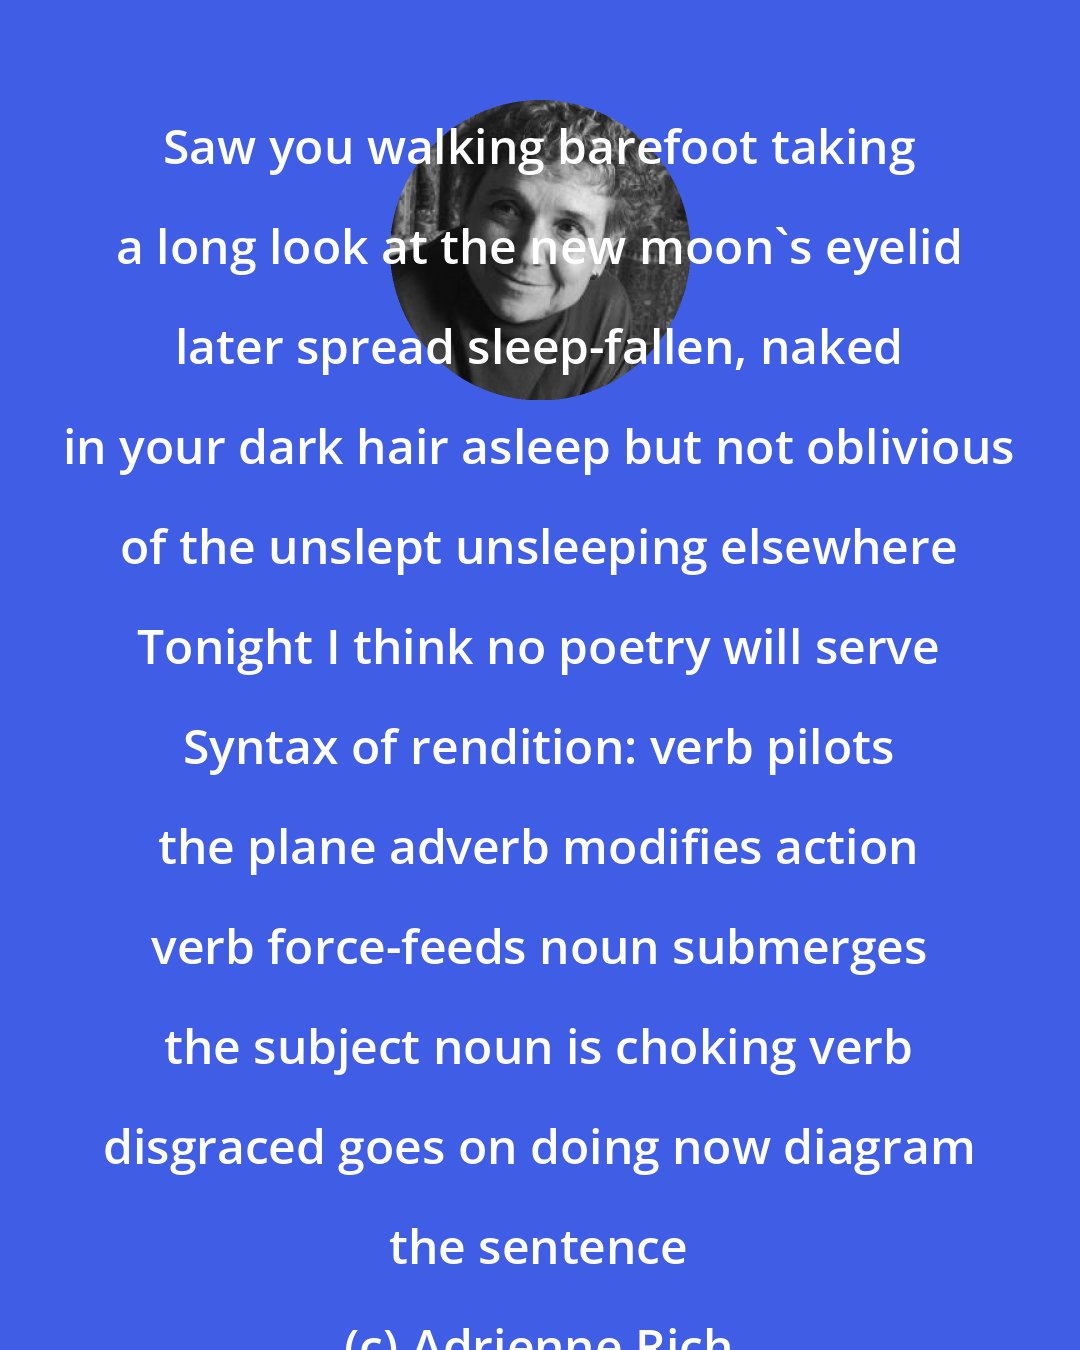 Adrienne Rich: Saw you walking barefoot taking a long look at the new moon's eyelid later spread sleep-fallen, naked in your dark hair asleep but not oblivious of the unslept unsleeping elsewhere Tonight I think no poetry will serve Syntax of rendition: verb pilots the plane adverb modifies action verb force-feeds noun submerges the subject noun is choking verb disgraced goes on doing now diagram the sentence